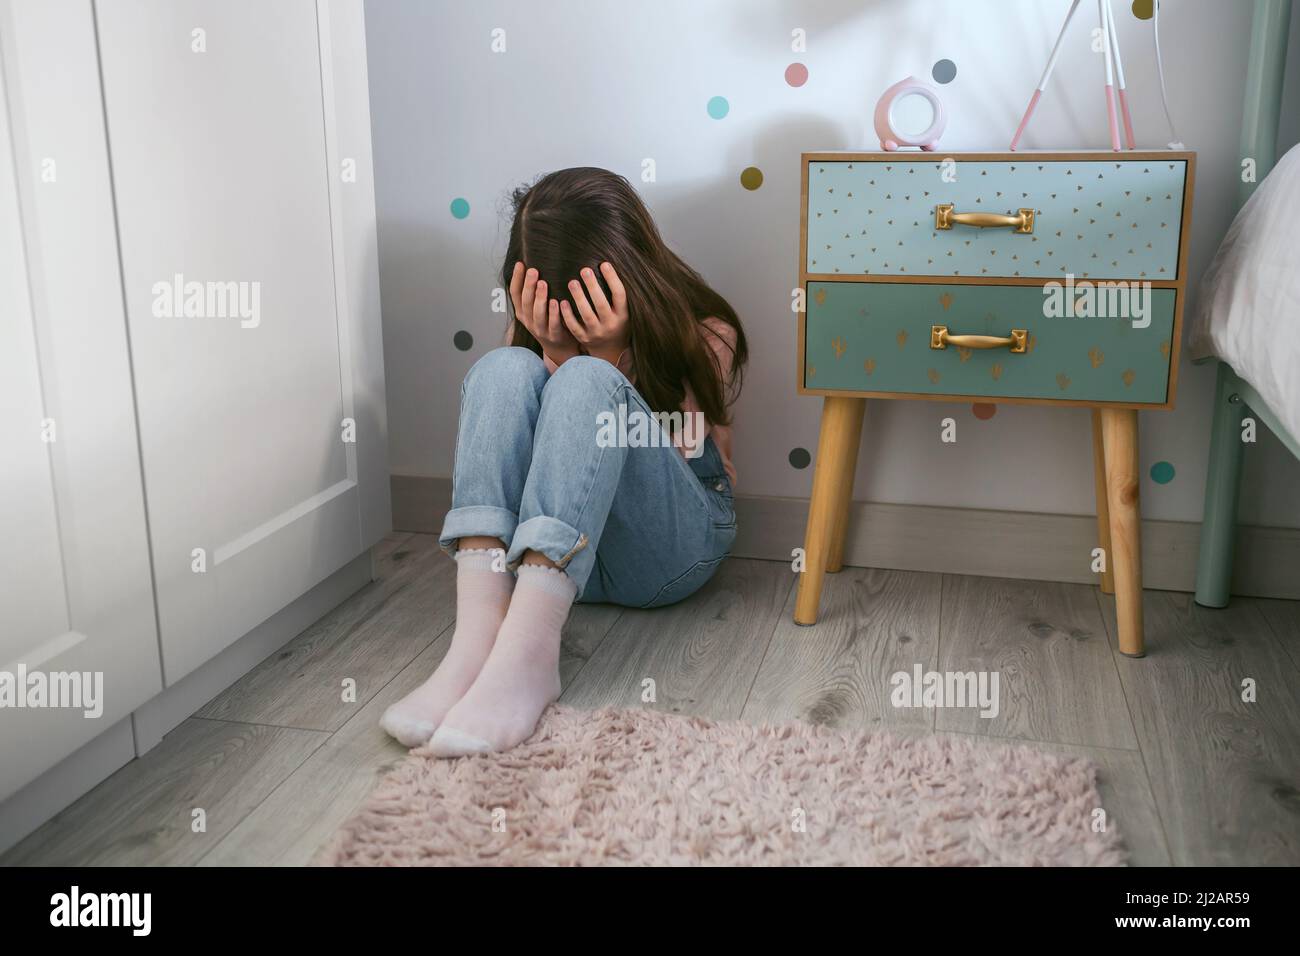 Unrecognizable little girl covering her face with hands sitting on the floor Stock Photo